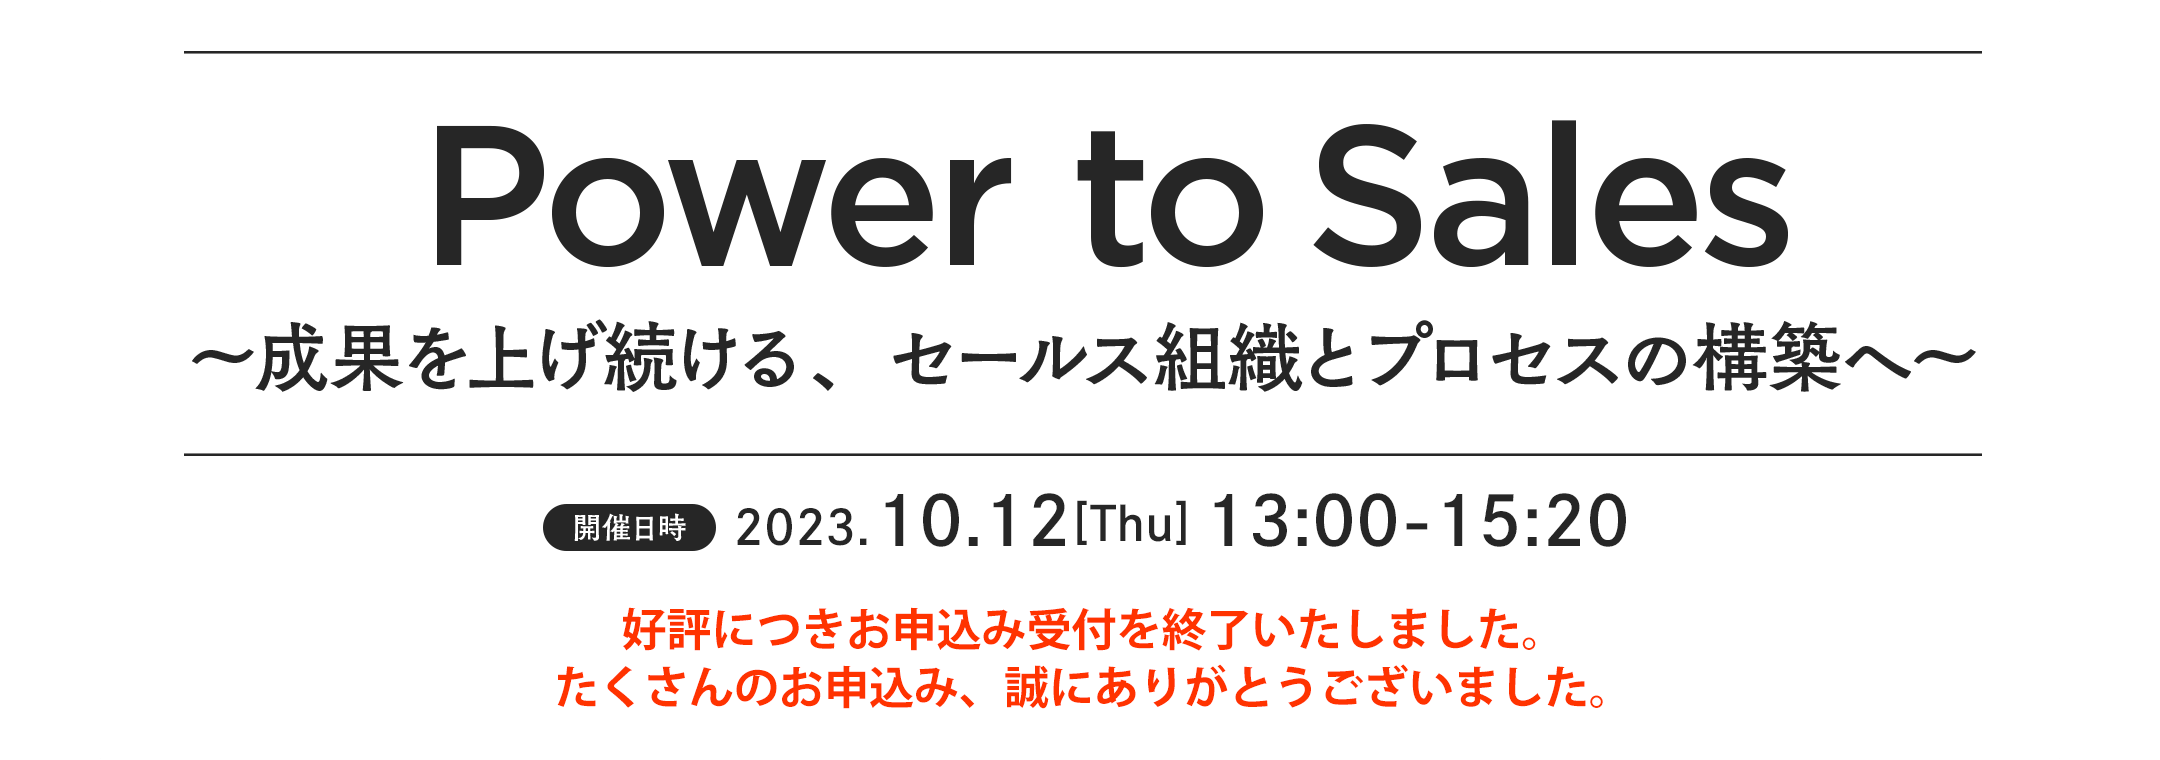 Power to Sales